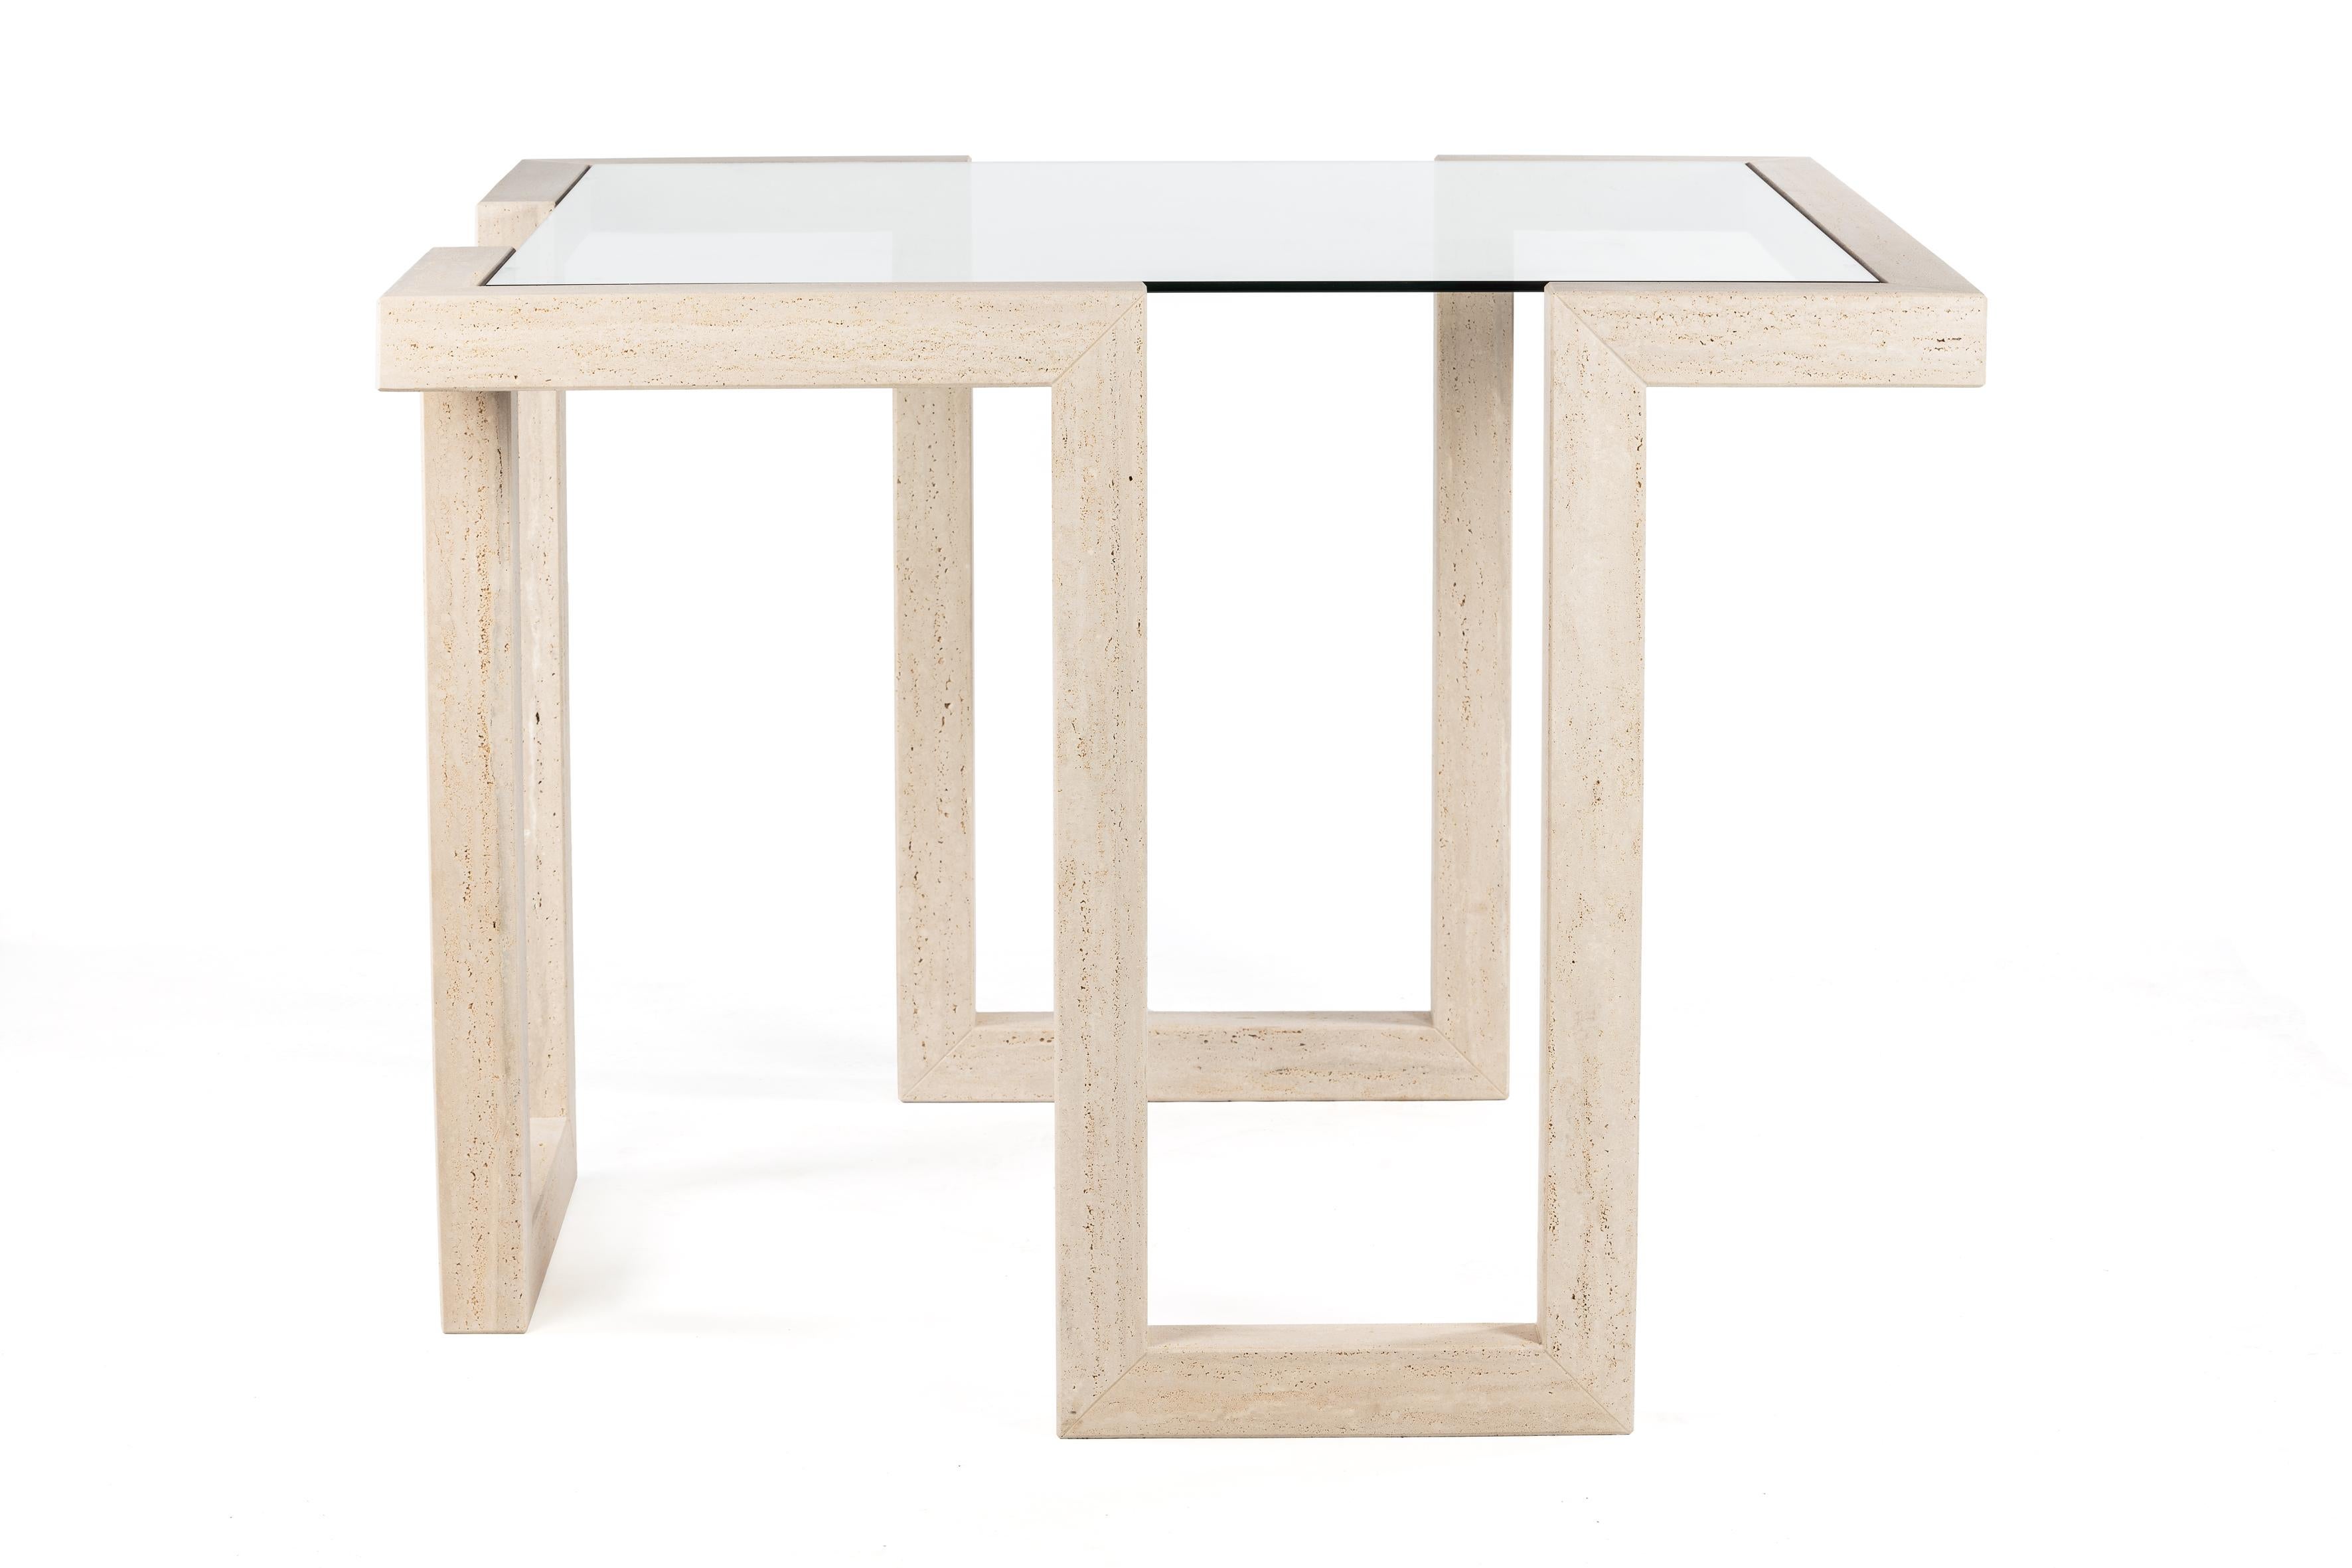 Castile is a travertine marble dining table with contemporary design. A taller table intended to be a dynamic meeting center, either in an open space such as a hotel or restaurant or in a private space as a sharing center.

The Castile modern